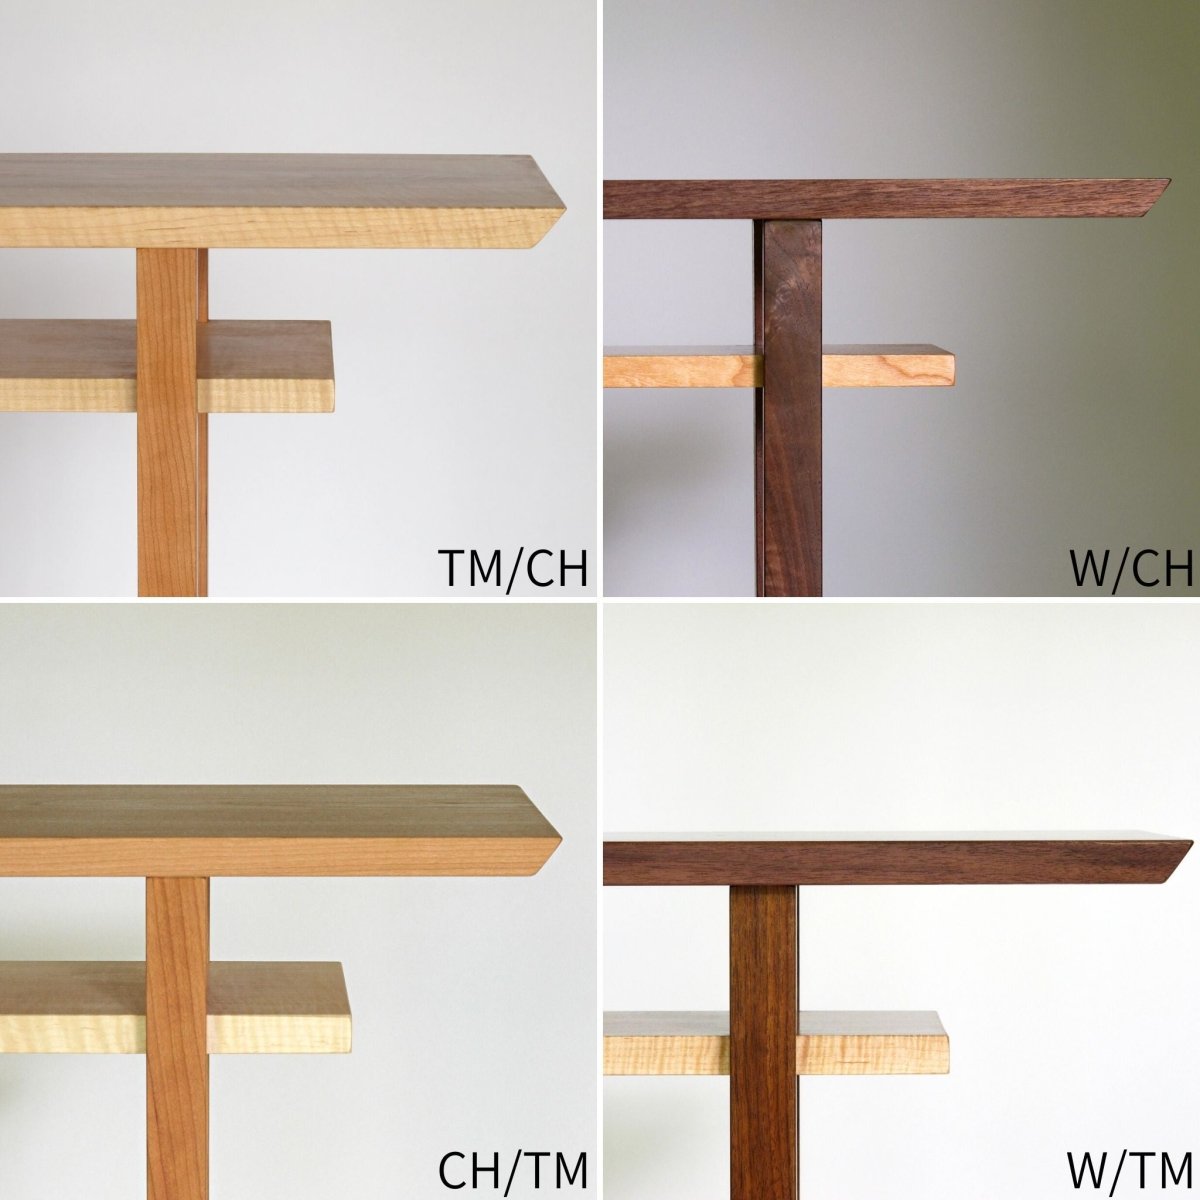 Our console tables can be customized to a wood color that works best for your home decor